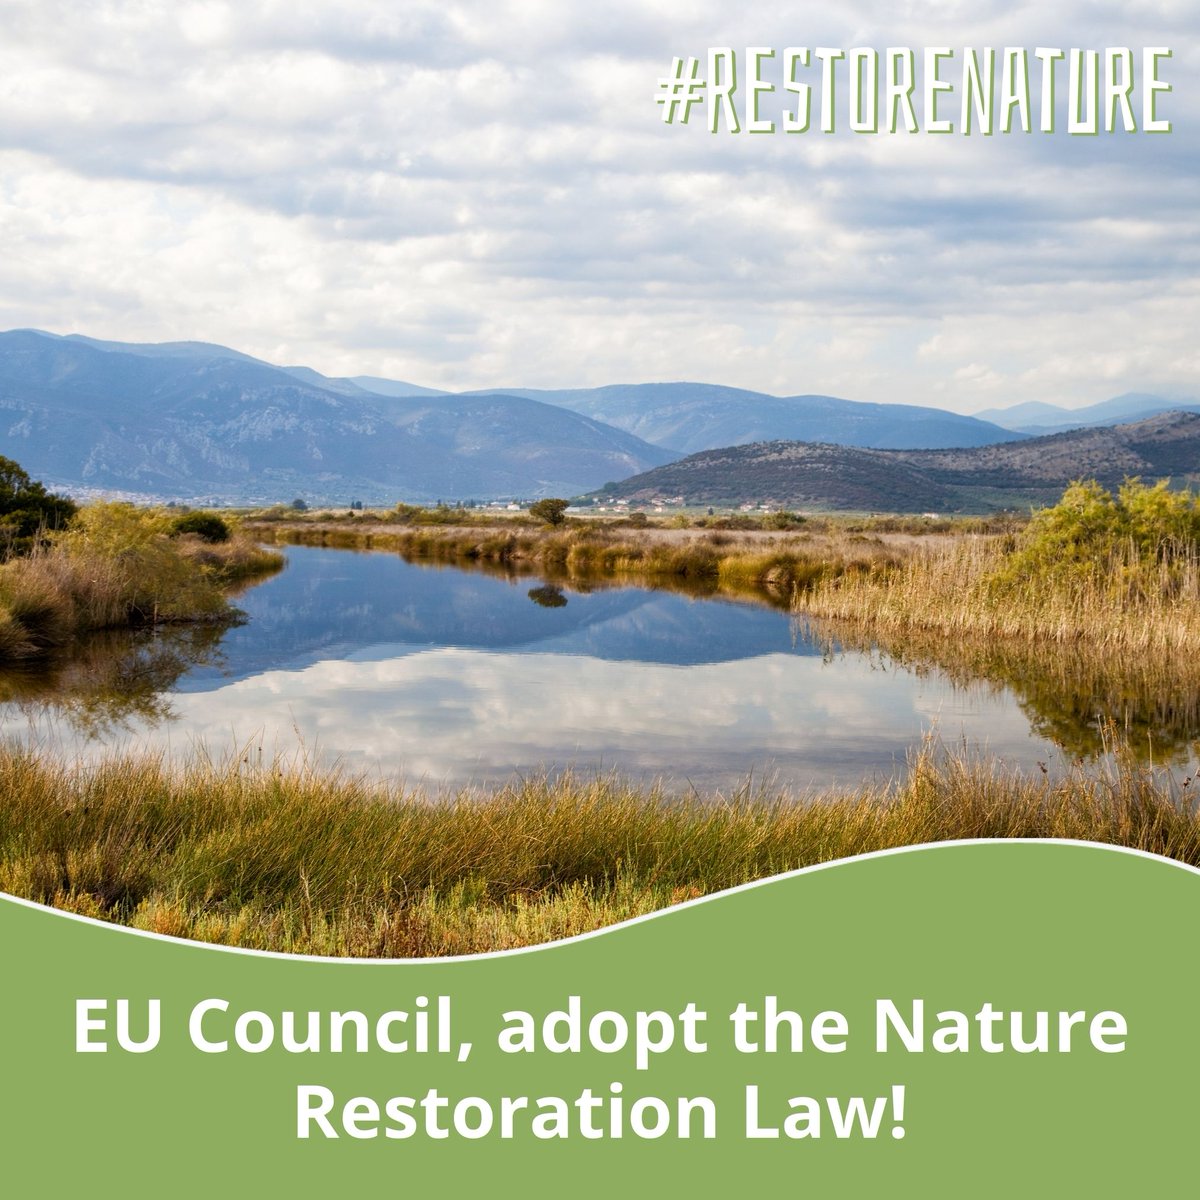 The failure to adopt the Nature Restoration Law not only jeopardises Europe’s ability to respond to biodiversity loss & climate change but risks derailing international efforts to #RestoreNature under UN Global Biodiversity Framework environmentalpillar.ie/time-to-get-th…